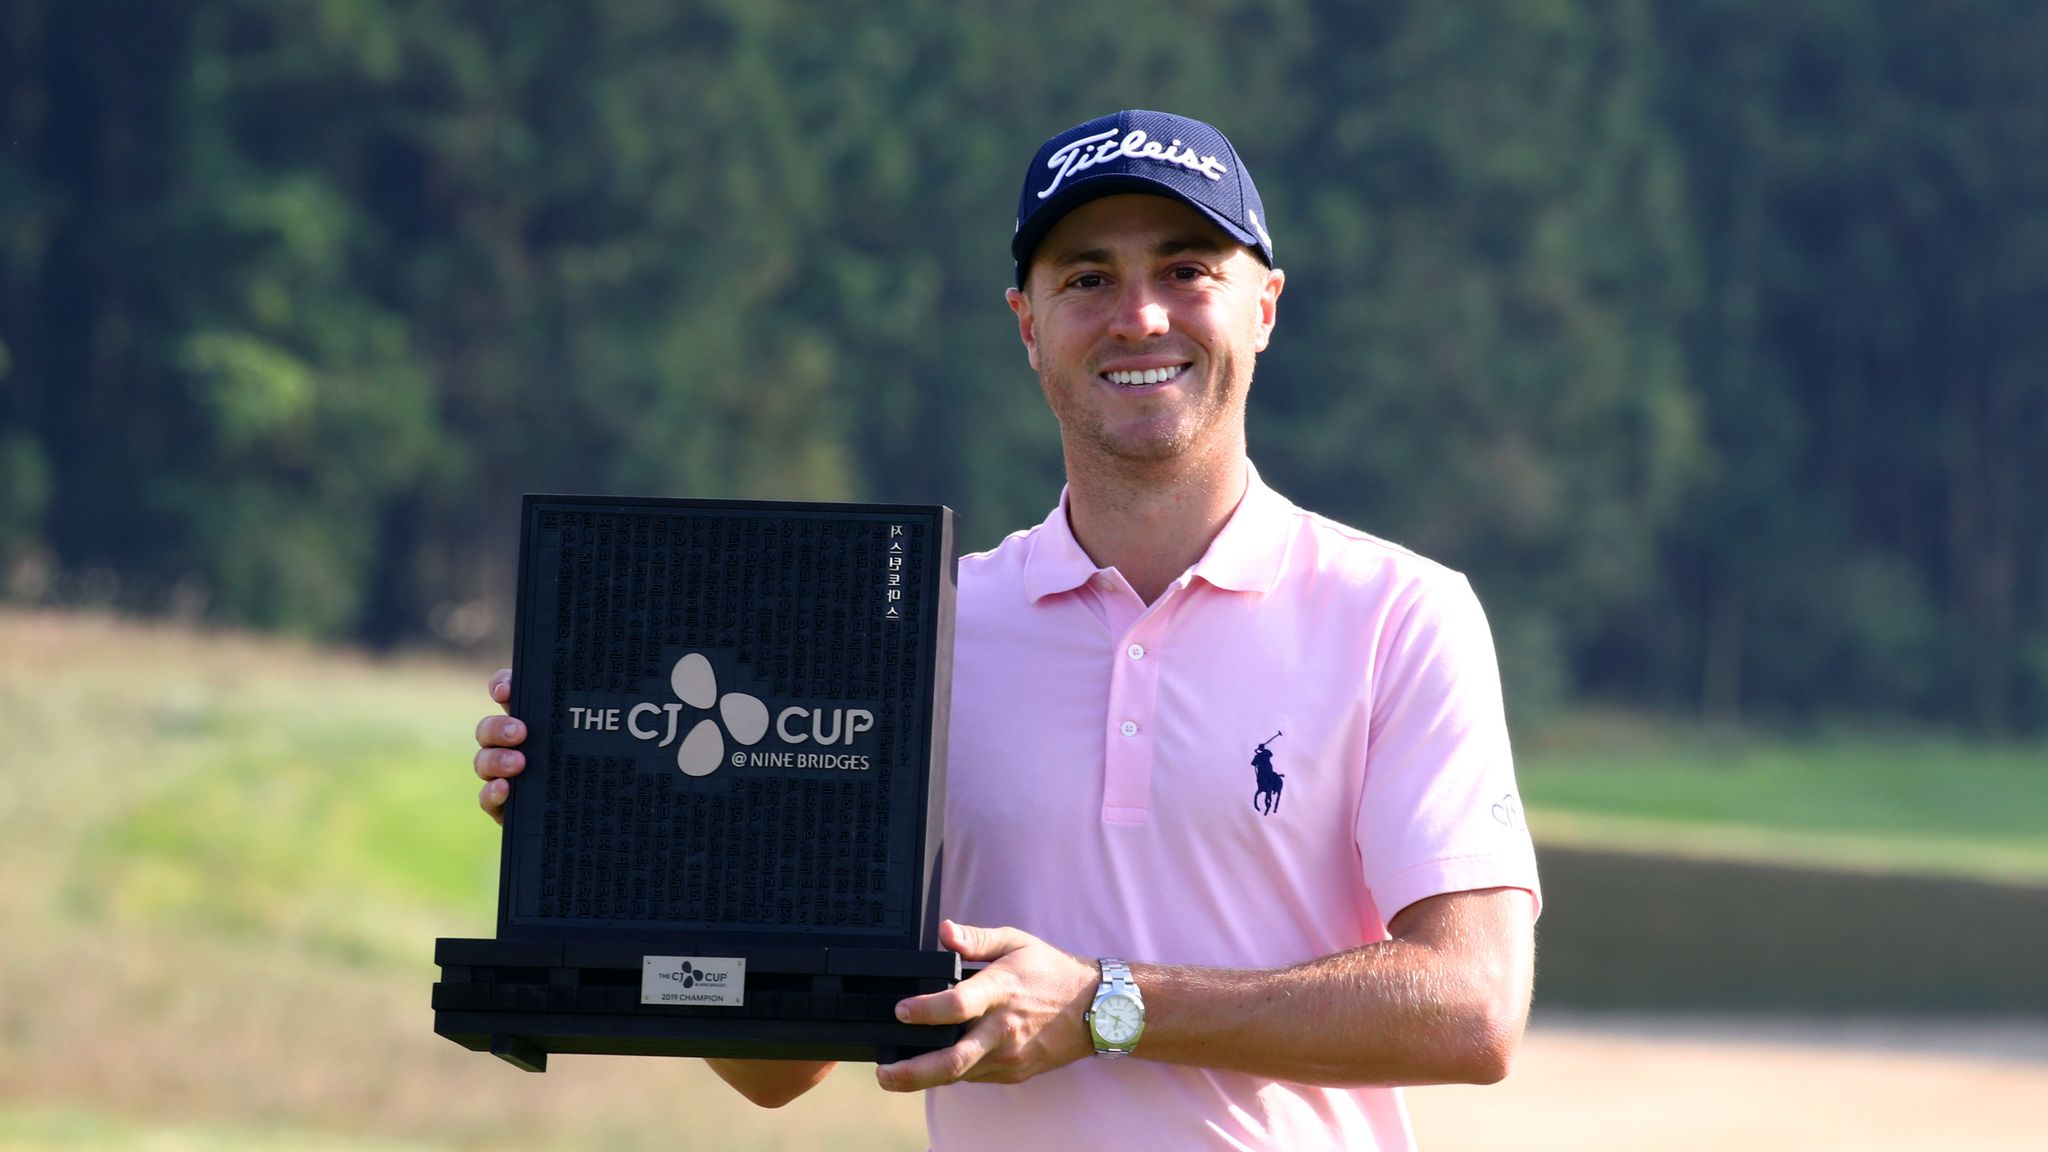 CJ Cup to be played in Las Vegas instead of South Korea in October Golf News Sky Sports